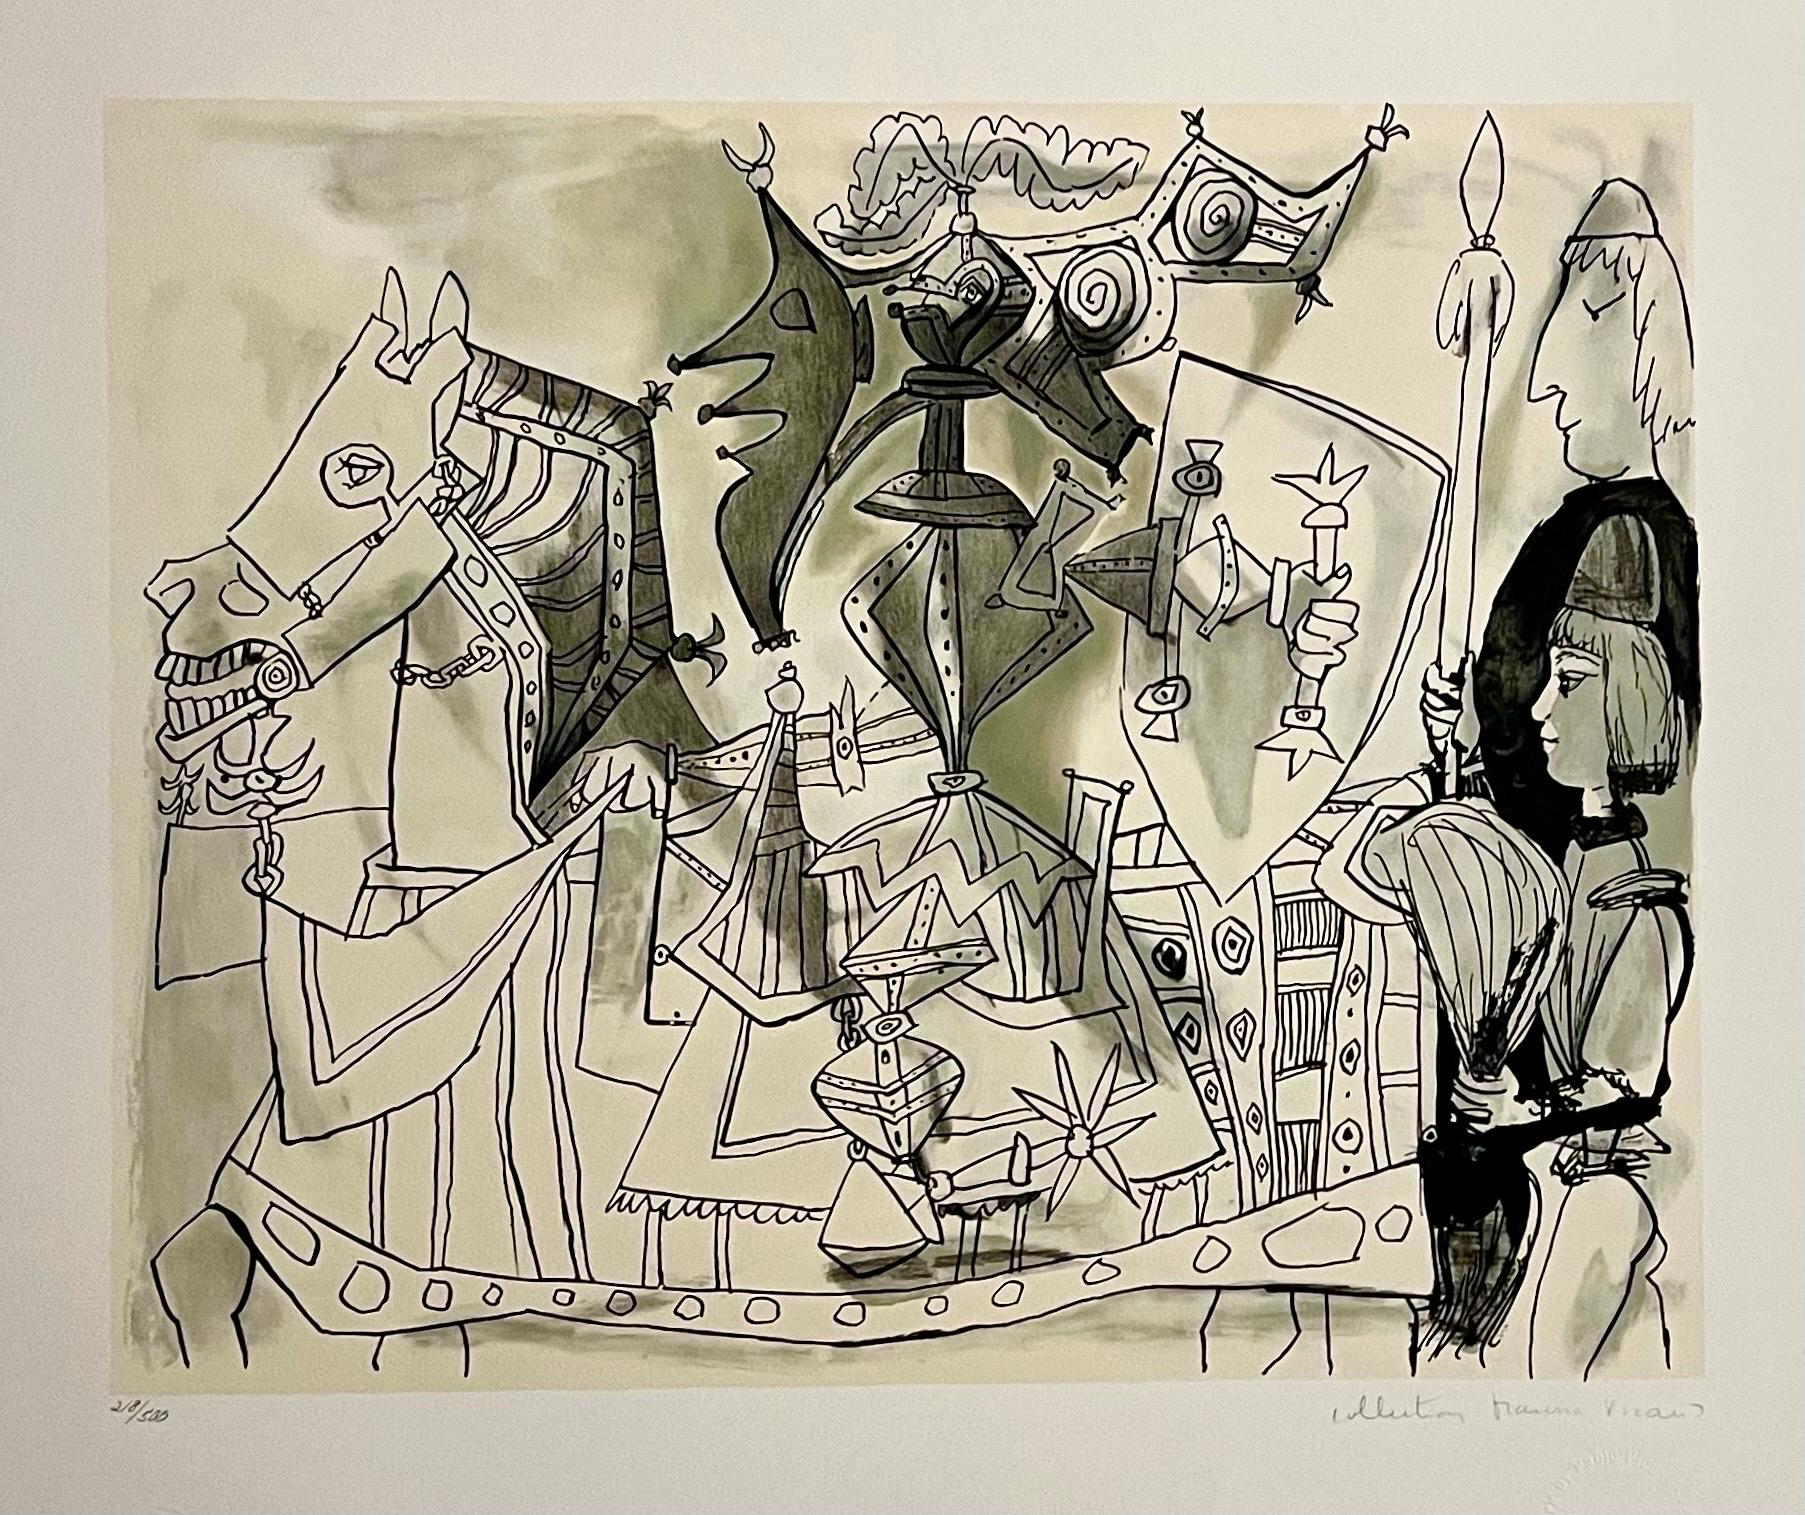 Díaz Ayuso visits the exhibition dedicated to Pablo Picasso and Gabrielle  Chanel at the Thyssen-Bornemisza Museum